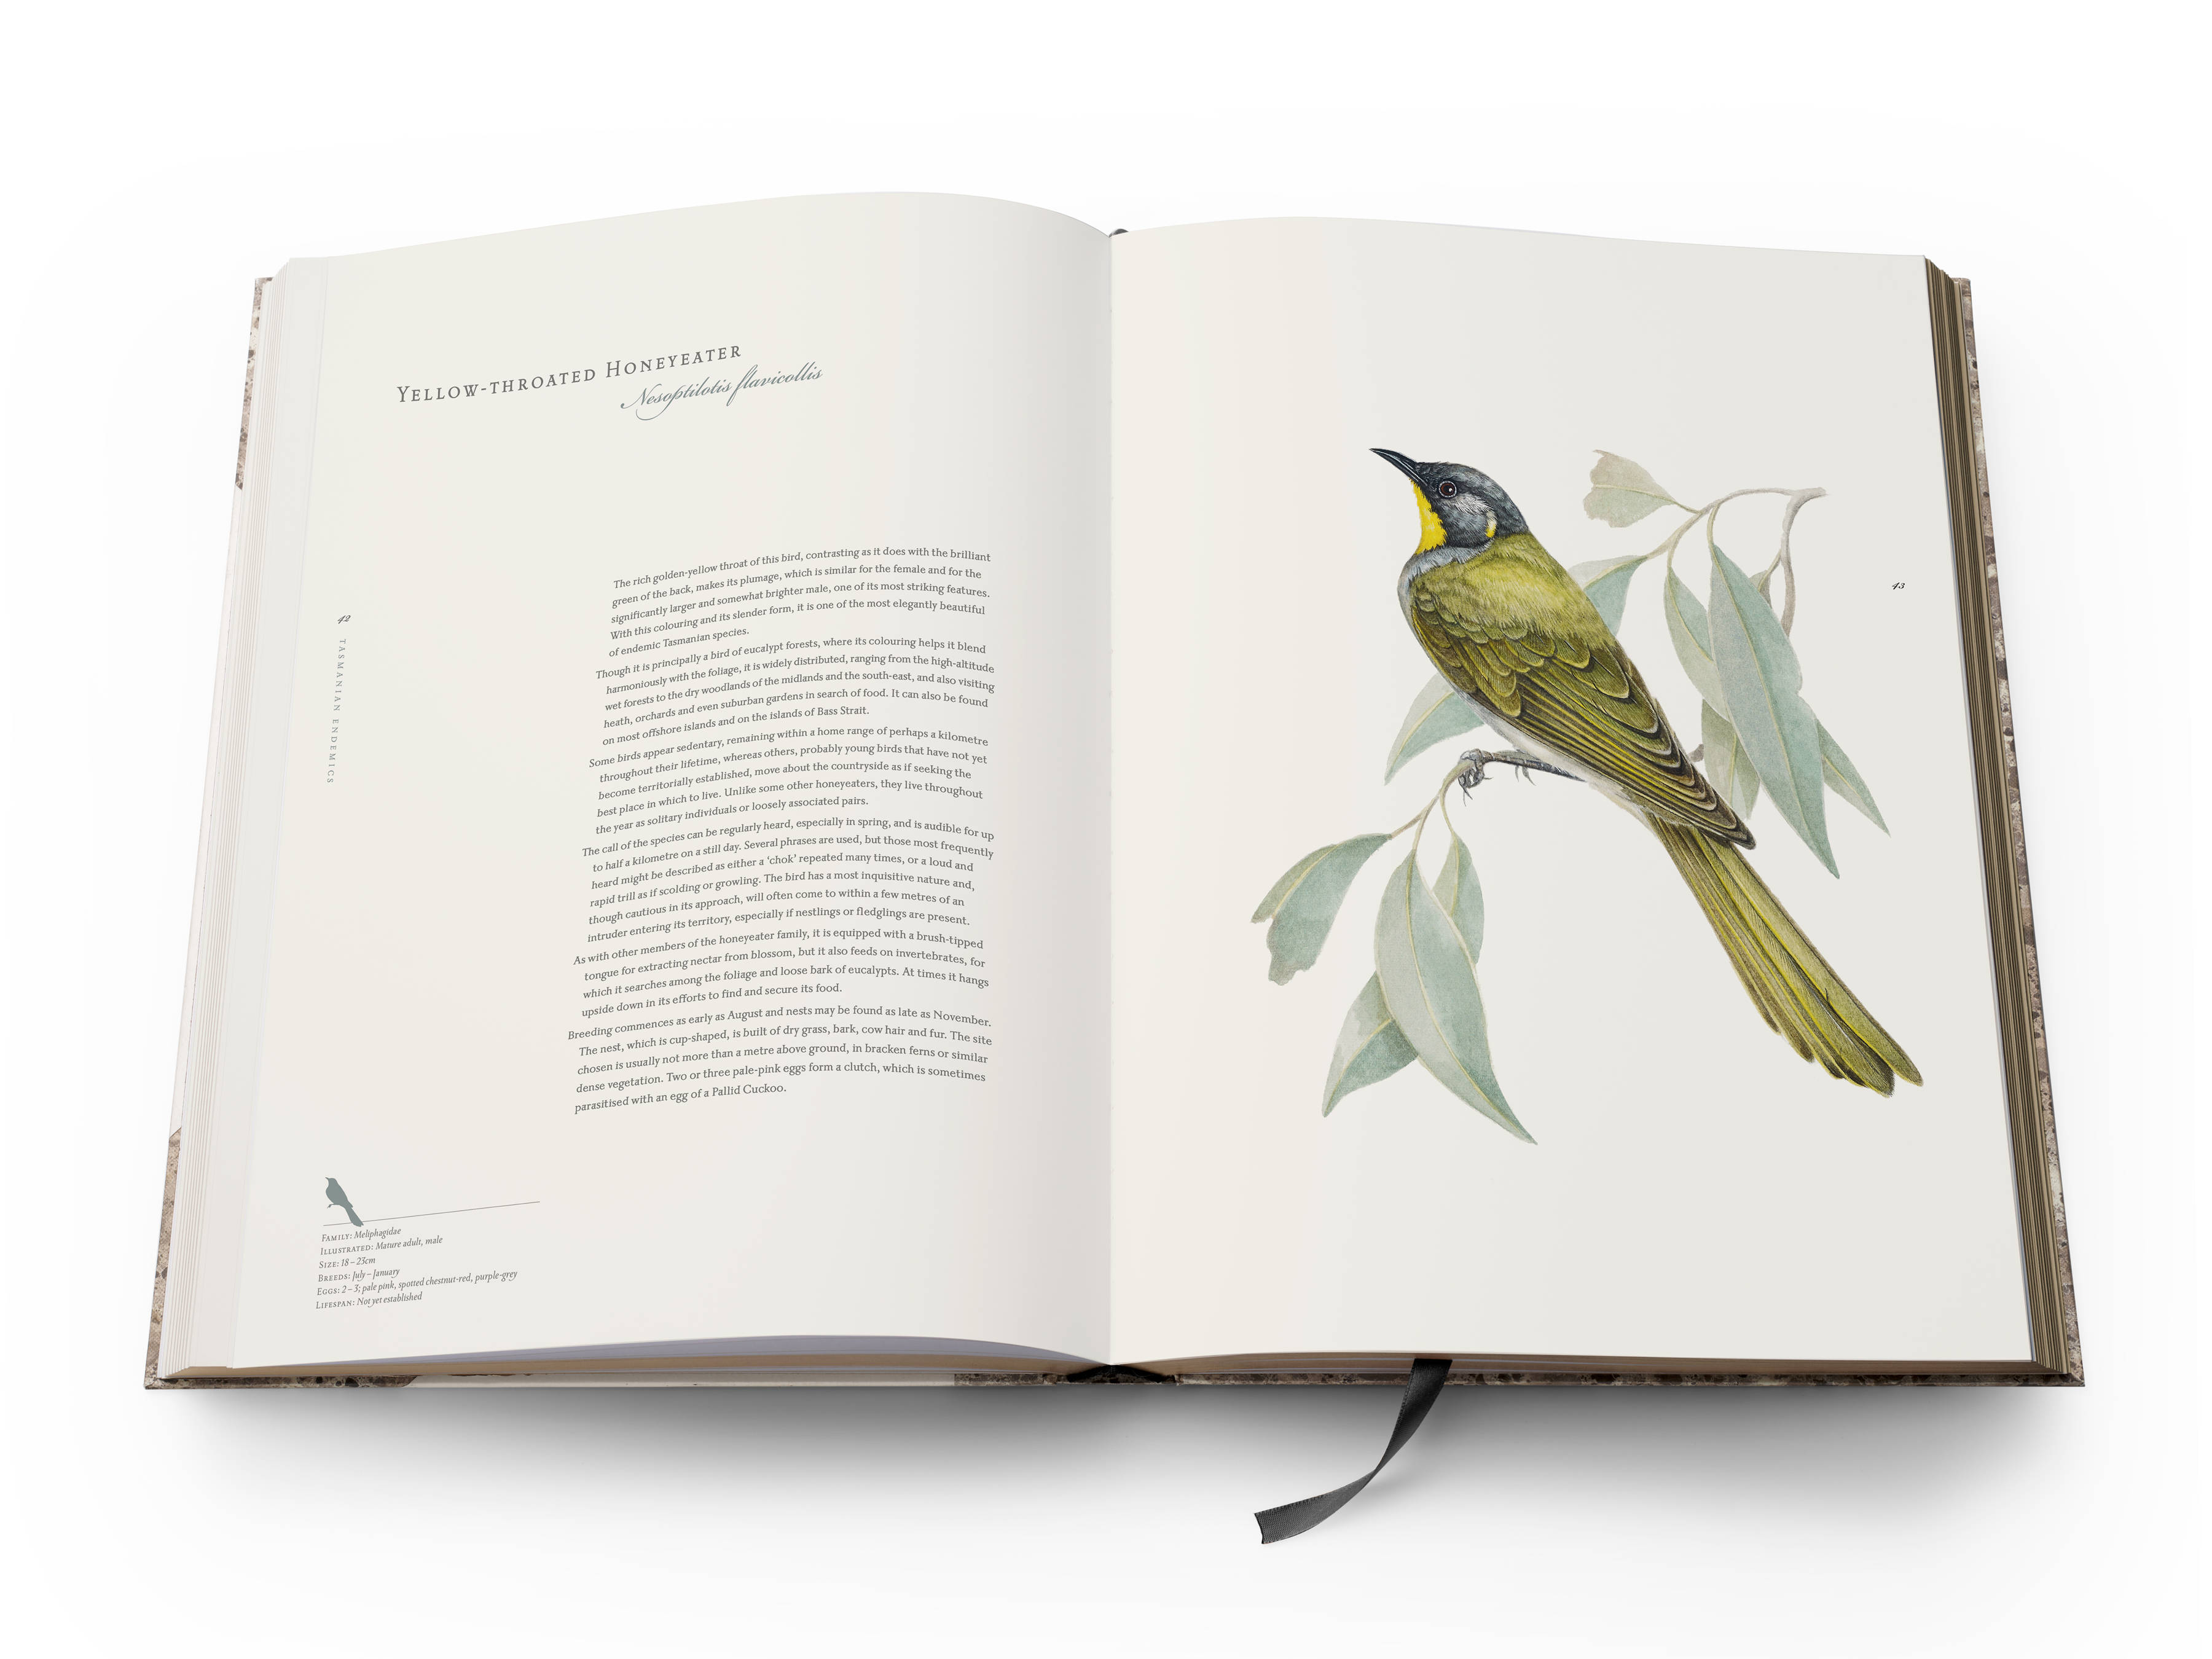 A double page spread from the book with text on the left and a full-page colour plate of a Yellow-throated Honeyeater ‘Nesoptilotis flavicollis’ on the right.